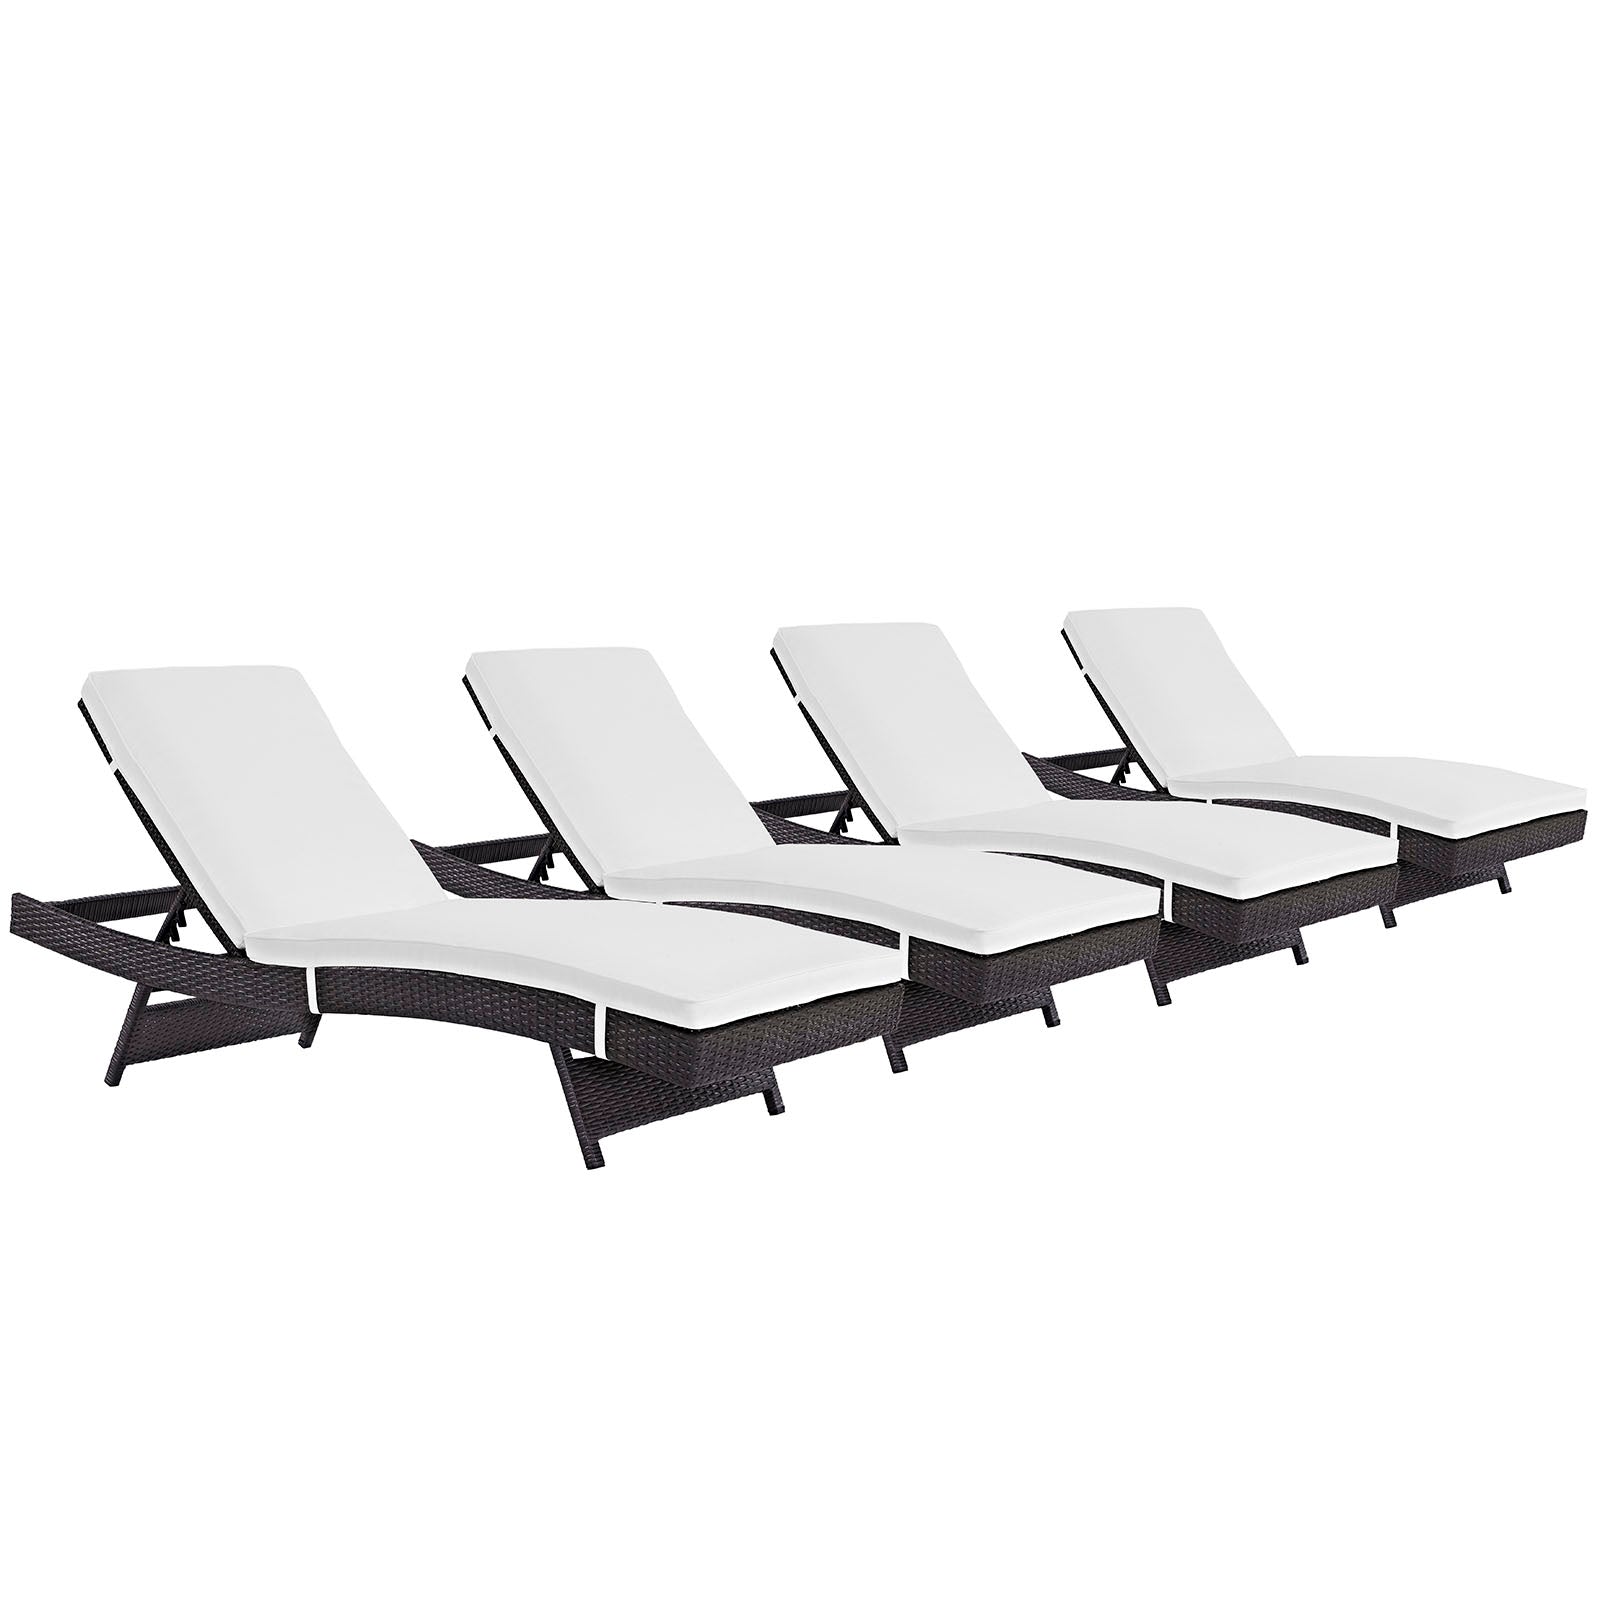 Modway Outdoor Loungers - Convene Chaise Outdoor Patio Espresso & White (Set of 4)